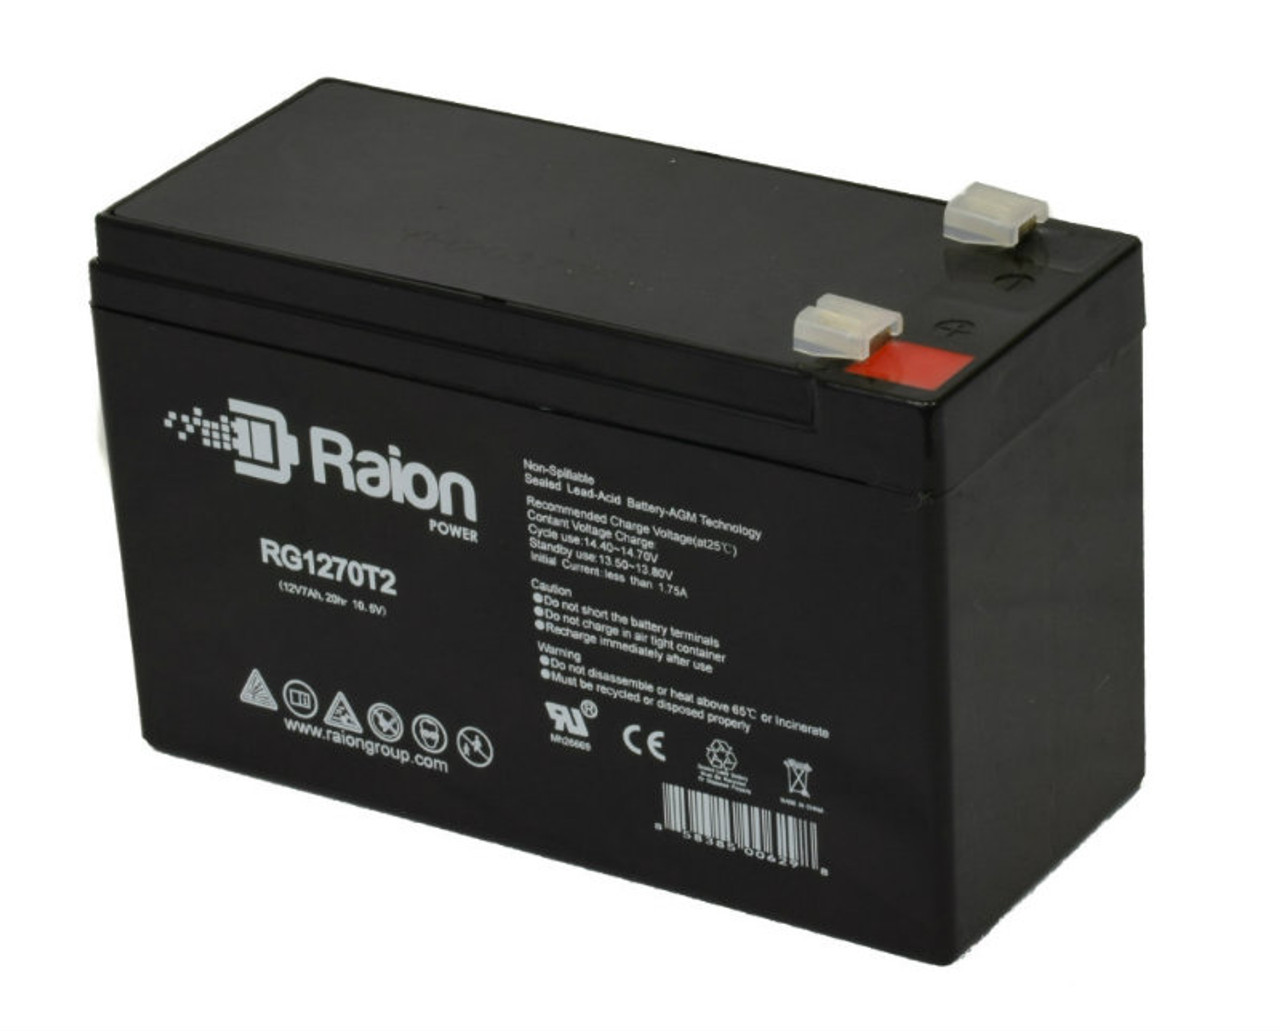 Raion Power RG1270T2 12V 7Ah Rechargeable Battery for Leoch LP12-7.2